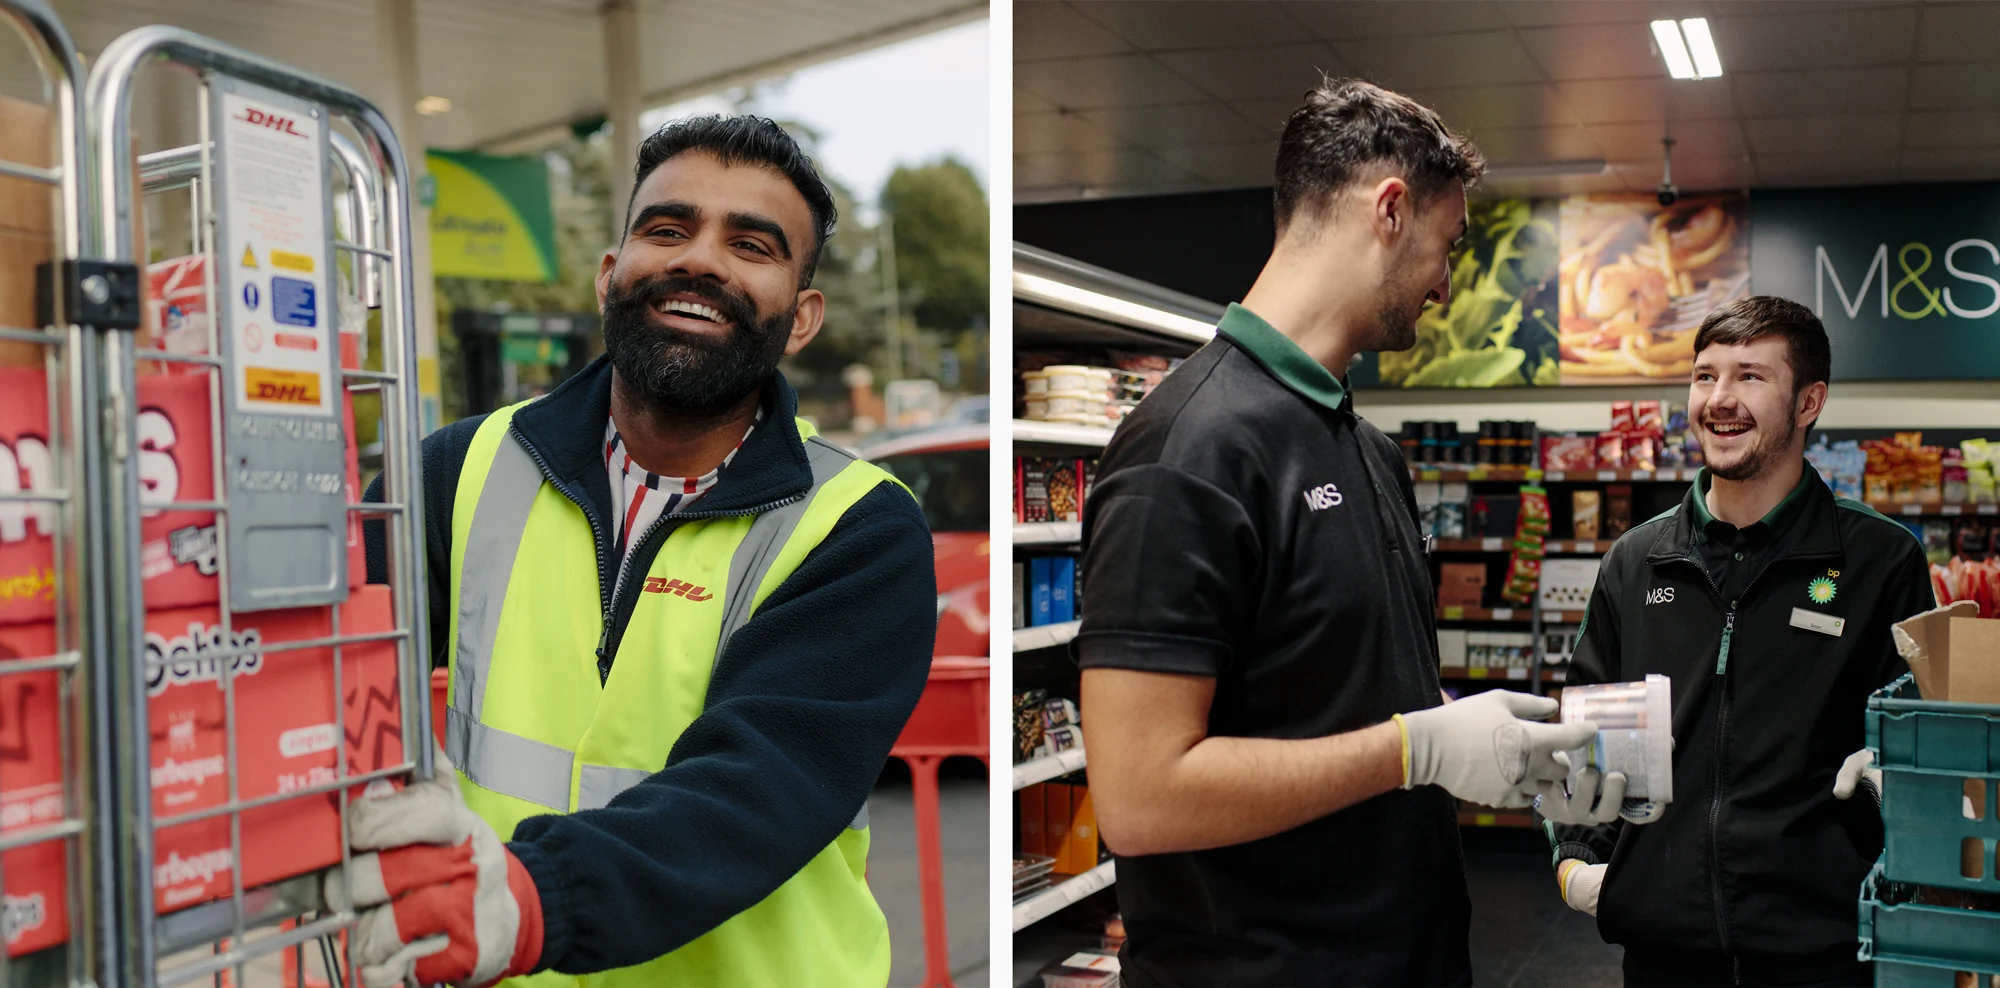 Delivering goods and retail staff at a bp forecourt M&S store in the UK